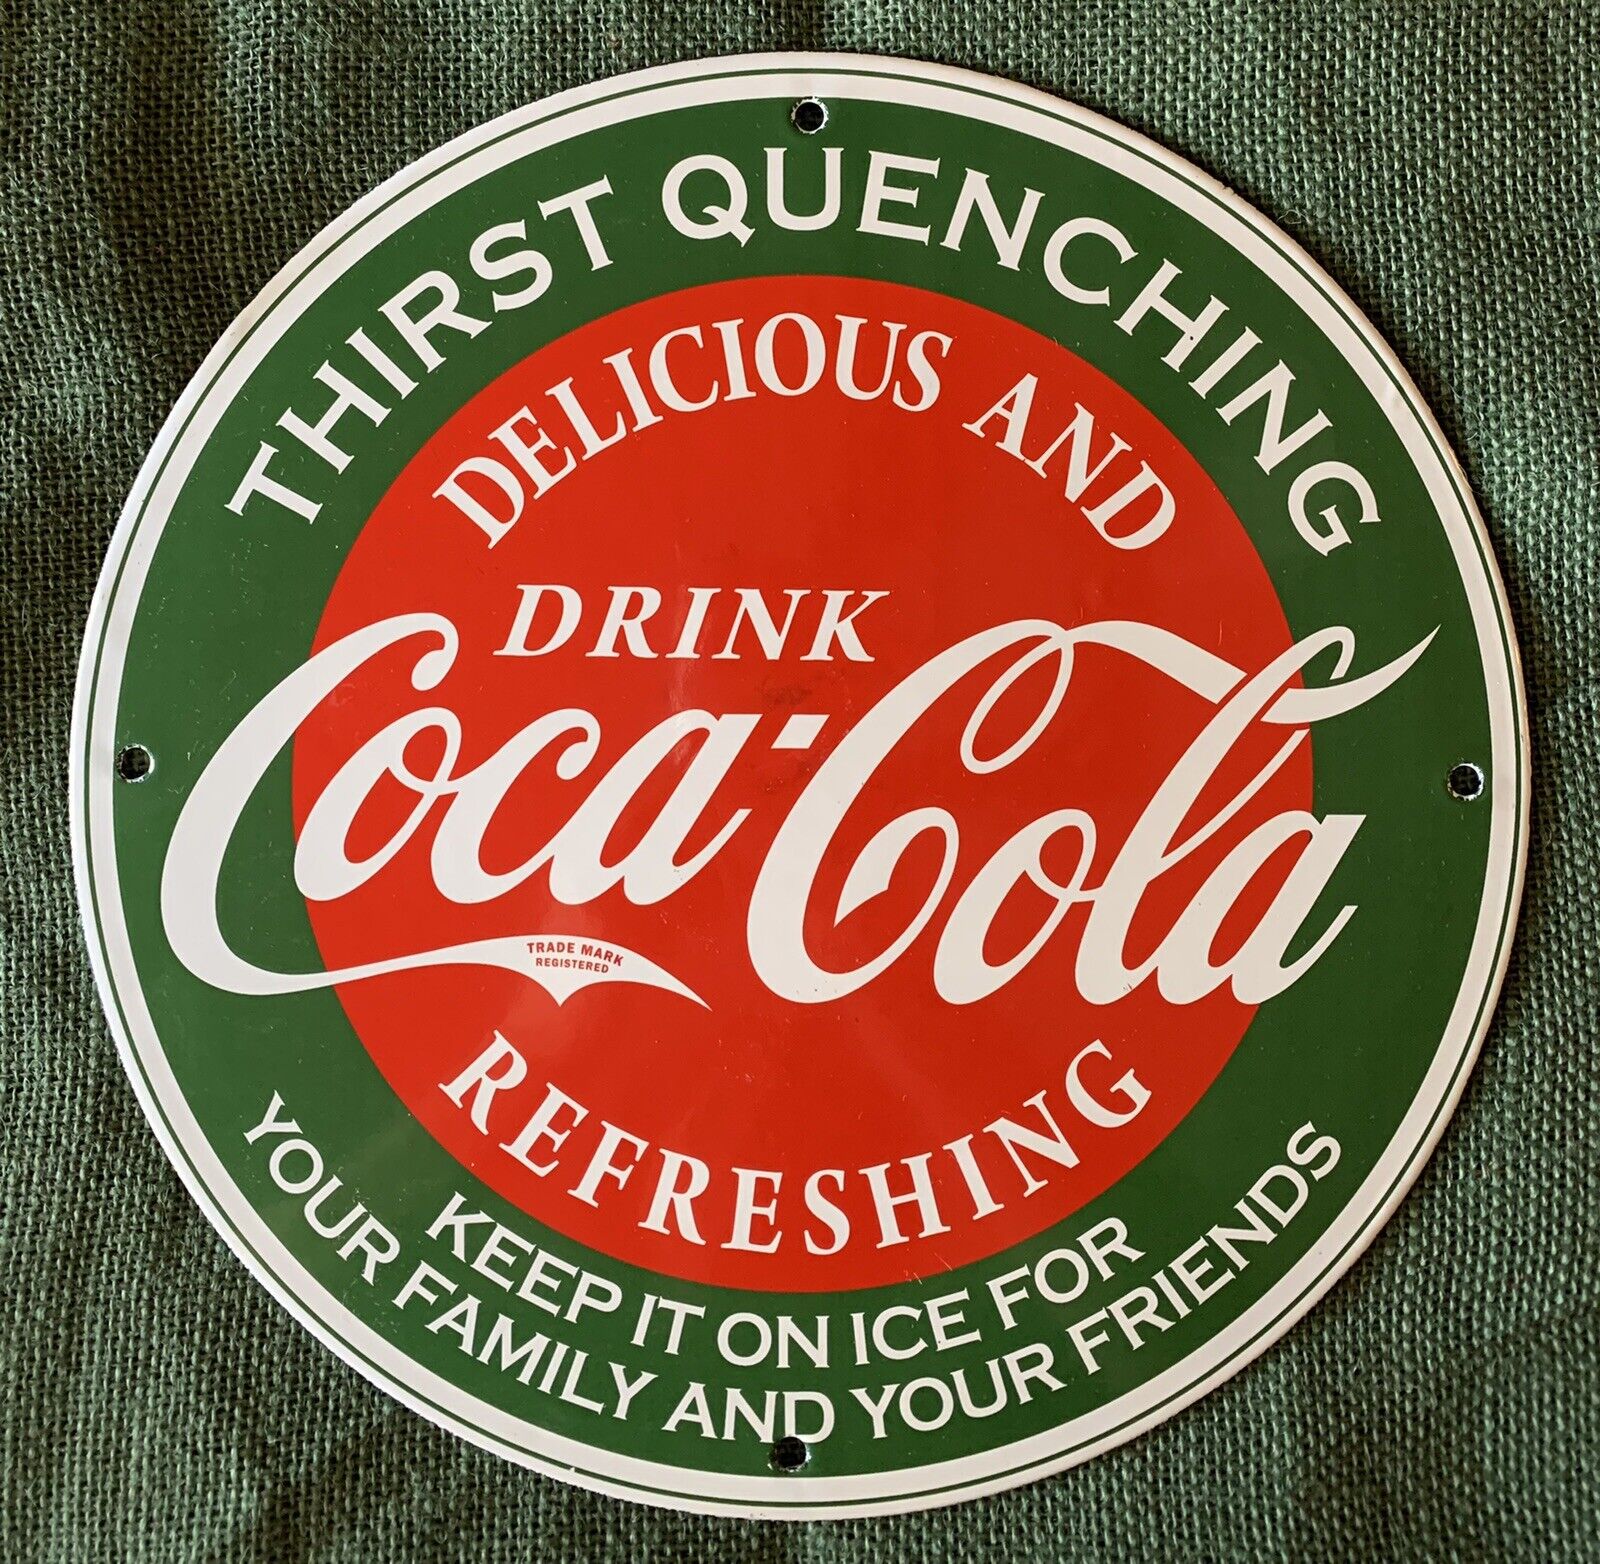 VINTAGE STYLE COCA COLA PORCELAIN ADVERTISING SIGN “THIRST QUENCHING “12 INCH